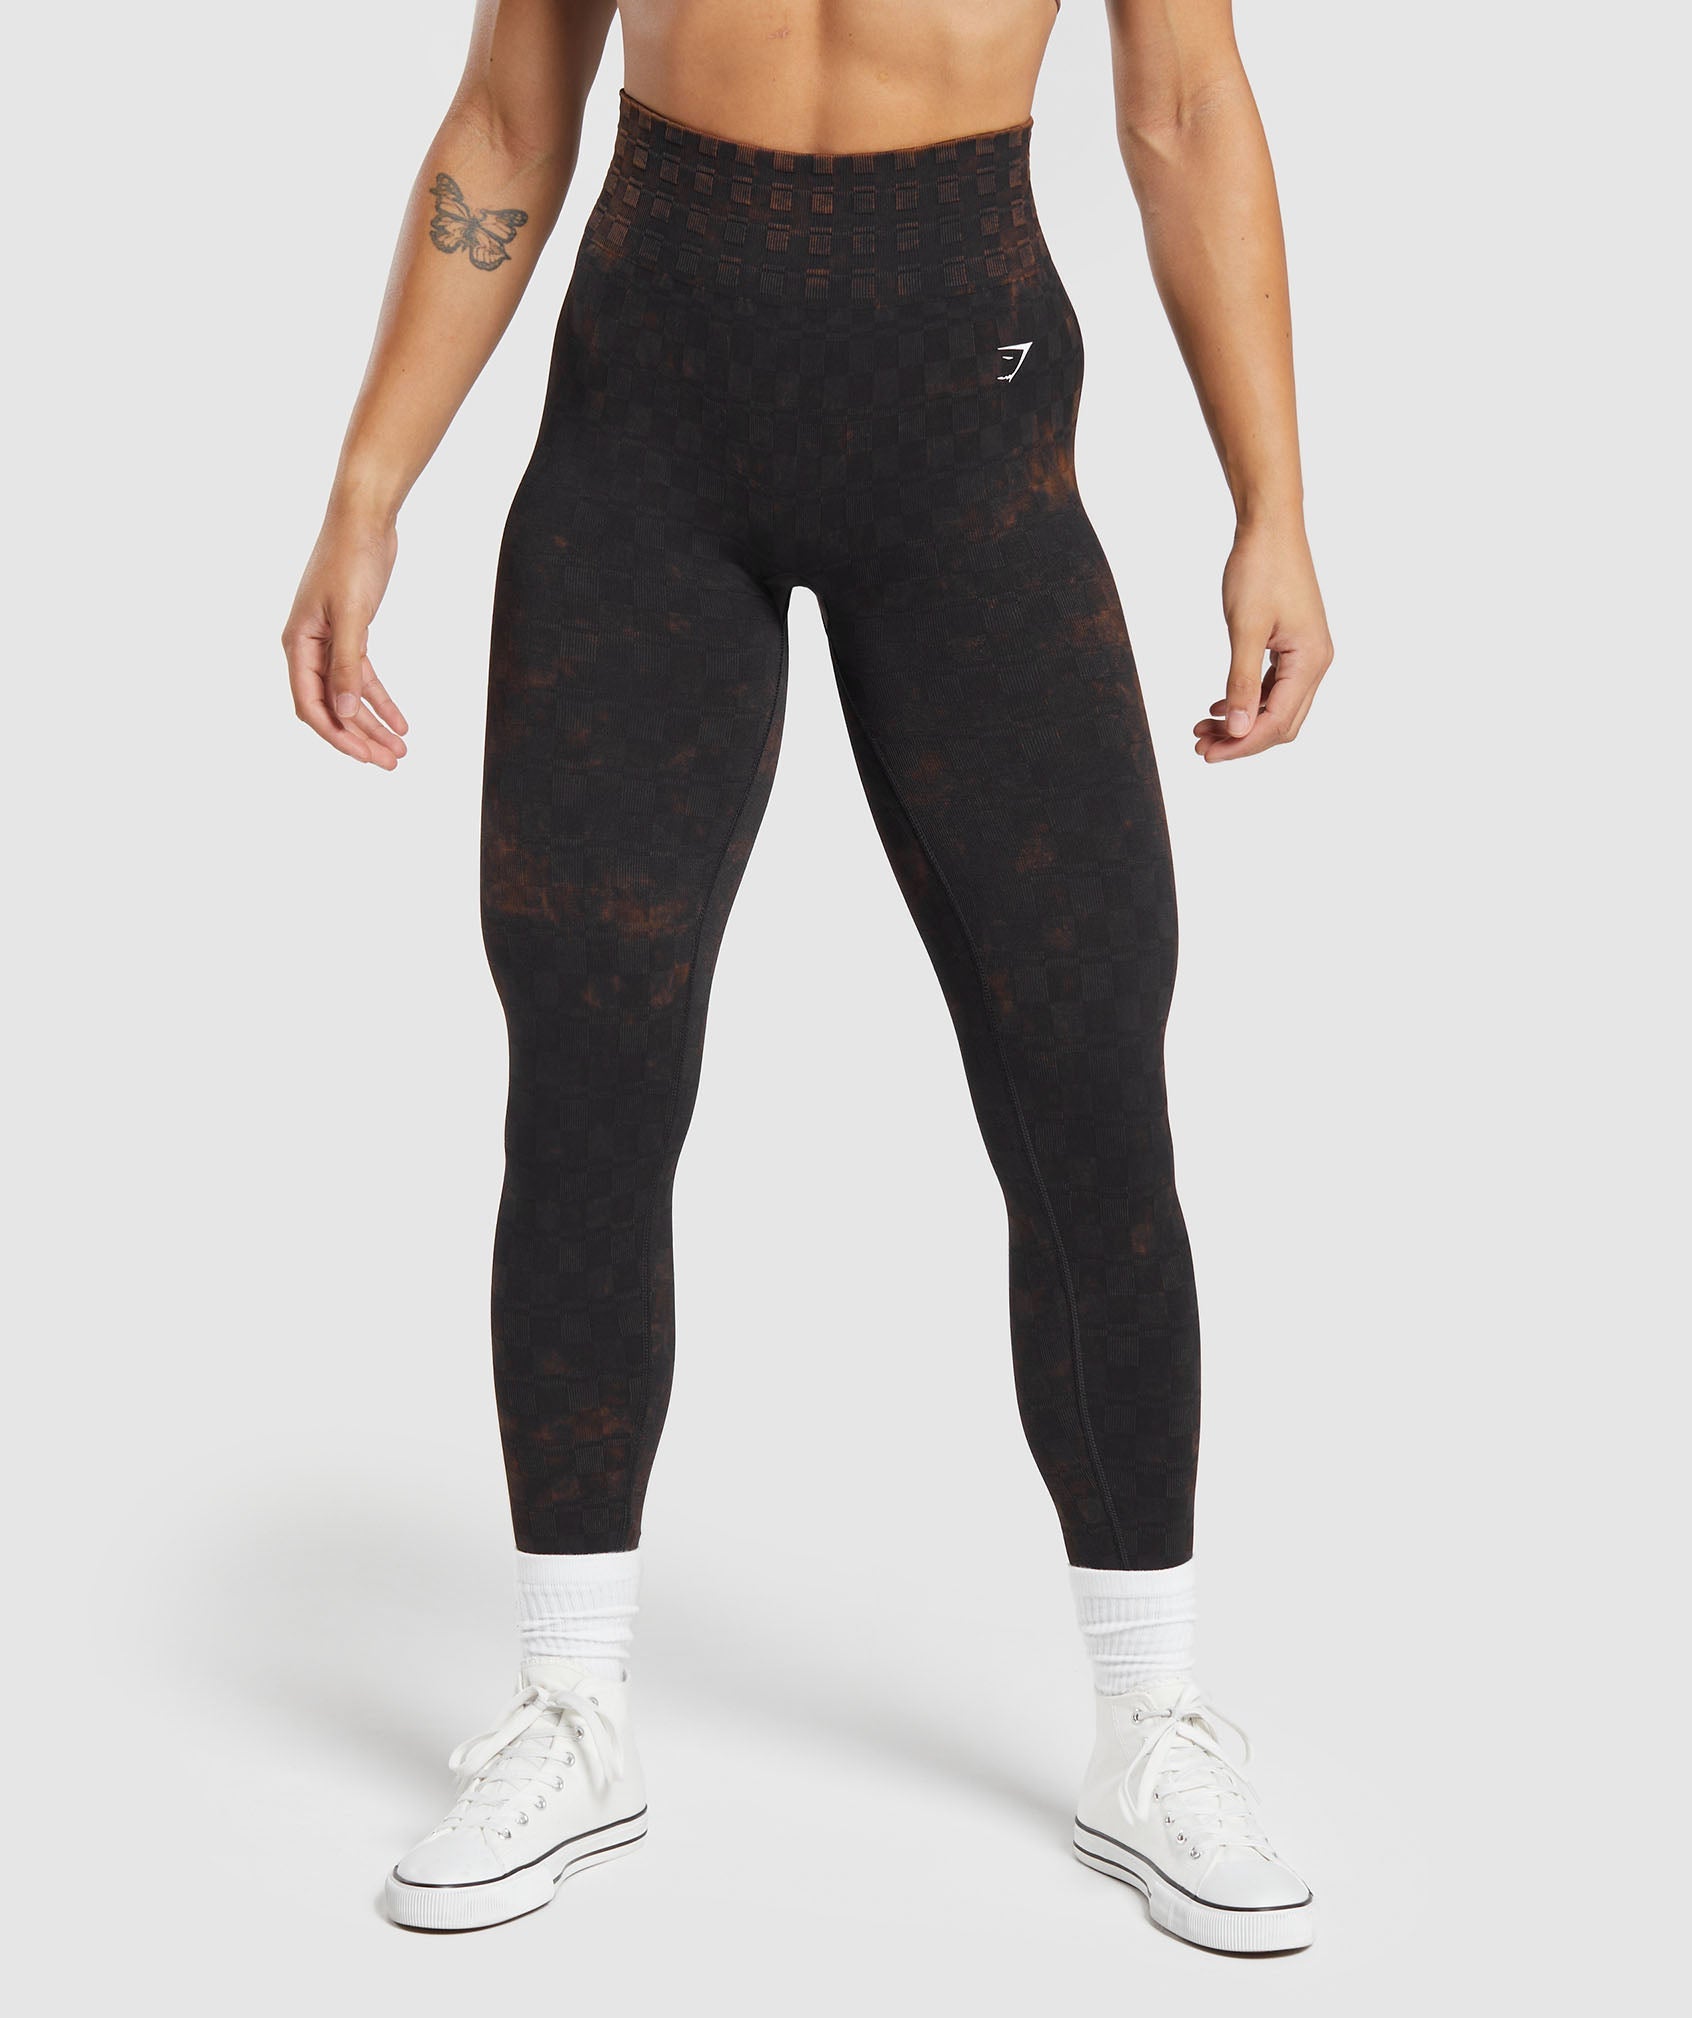 Check Seamless Washed Leggings